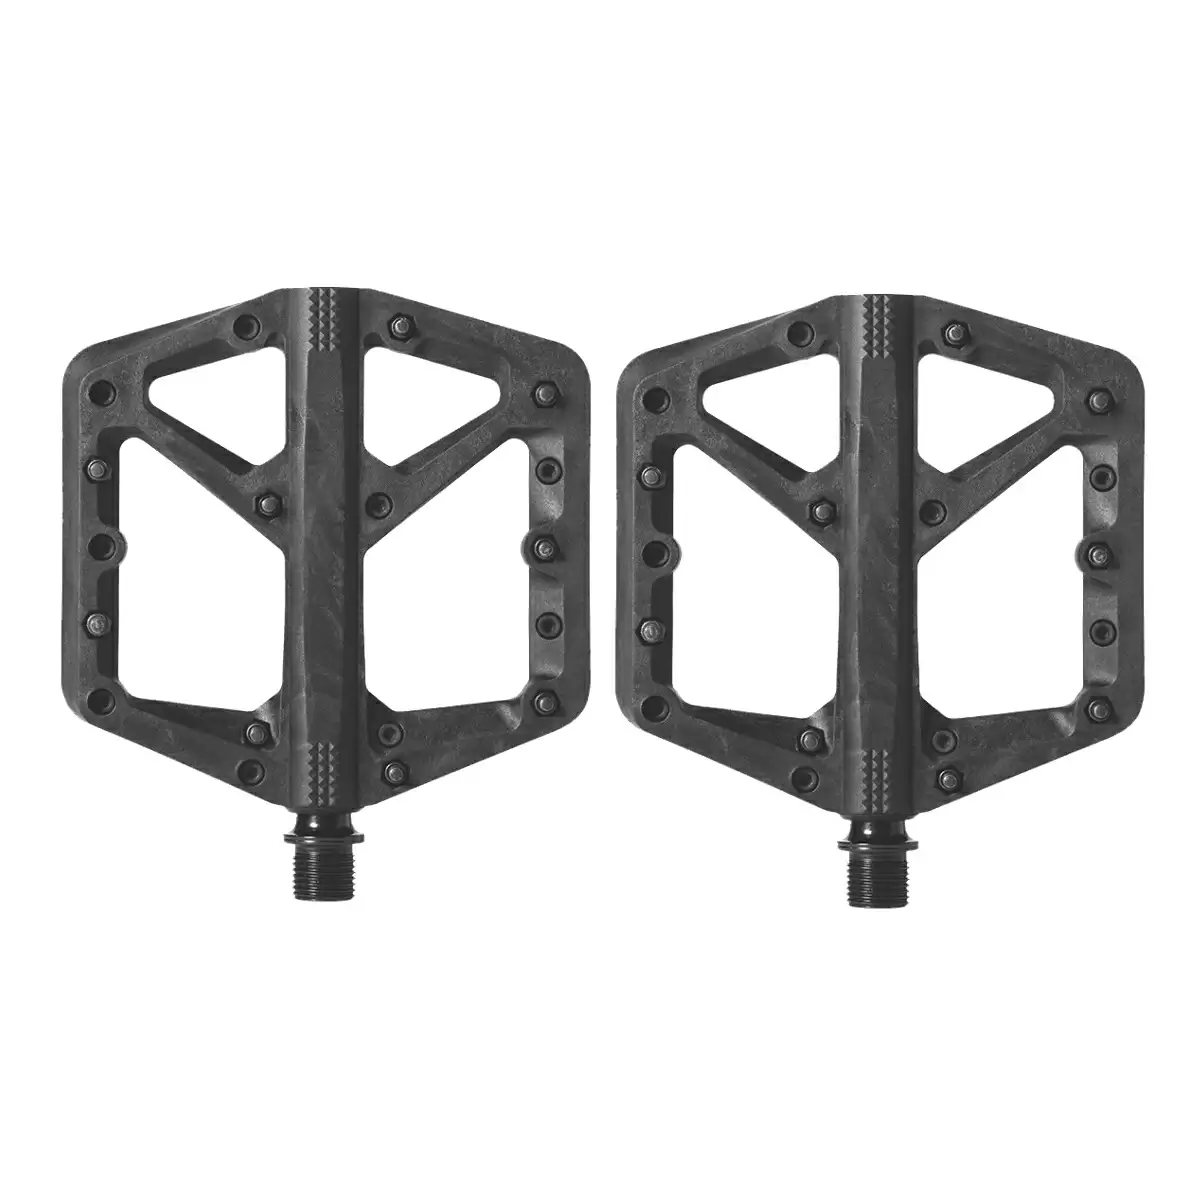 Pair of pedals Stamp 1 Small black - image